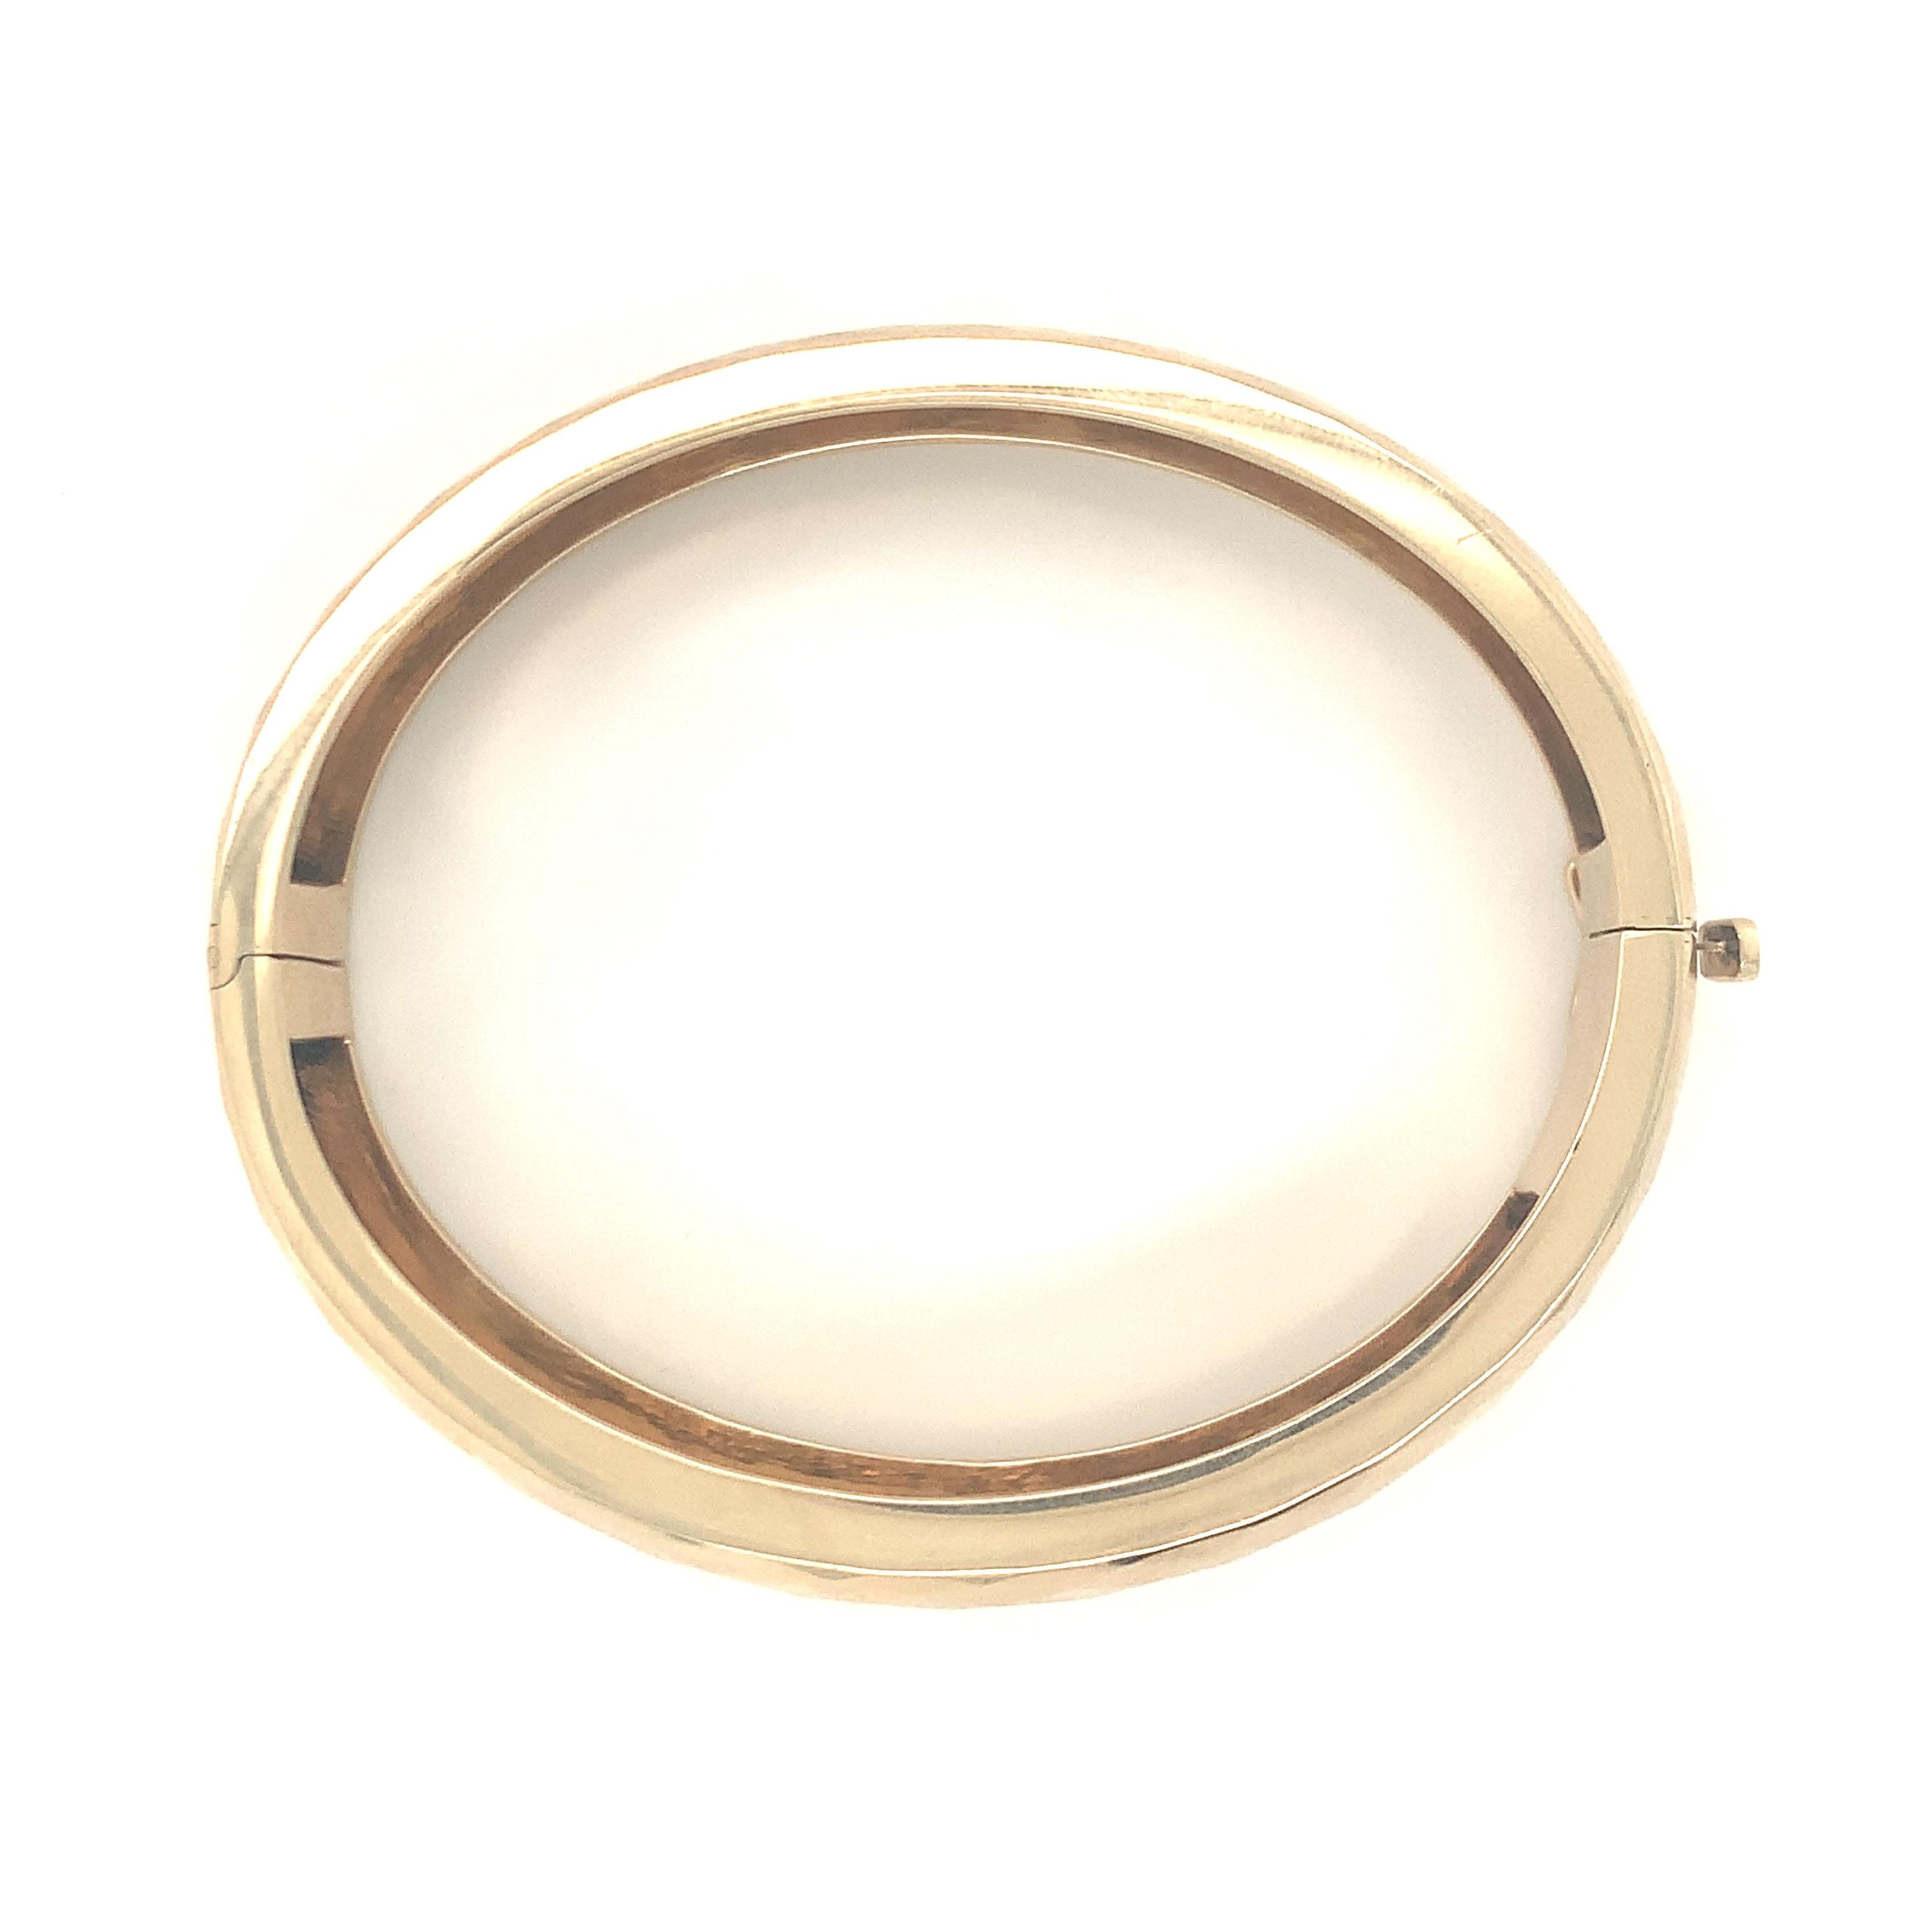 One 14K yellow gold bangle bracelet featuring a high polish, diamond-shaped surface style finish. Measuring 0.5 inches wide. Circa 1970s.

Sleek, glowing, scintillating.

Additional information:
Metal: 14K yellow gold
Circa: 1970s
Stamp/Hallmark: